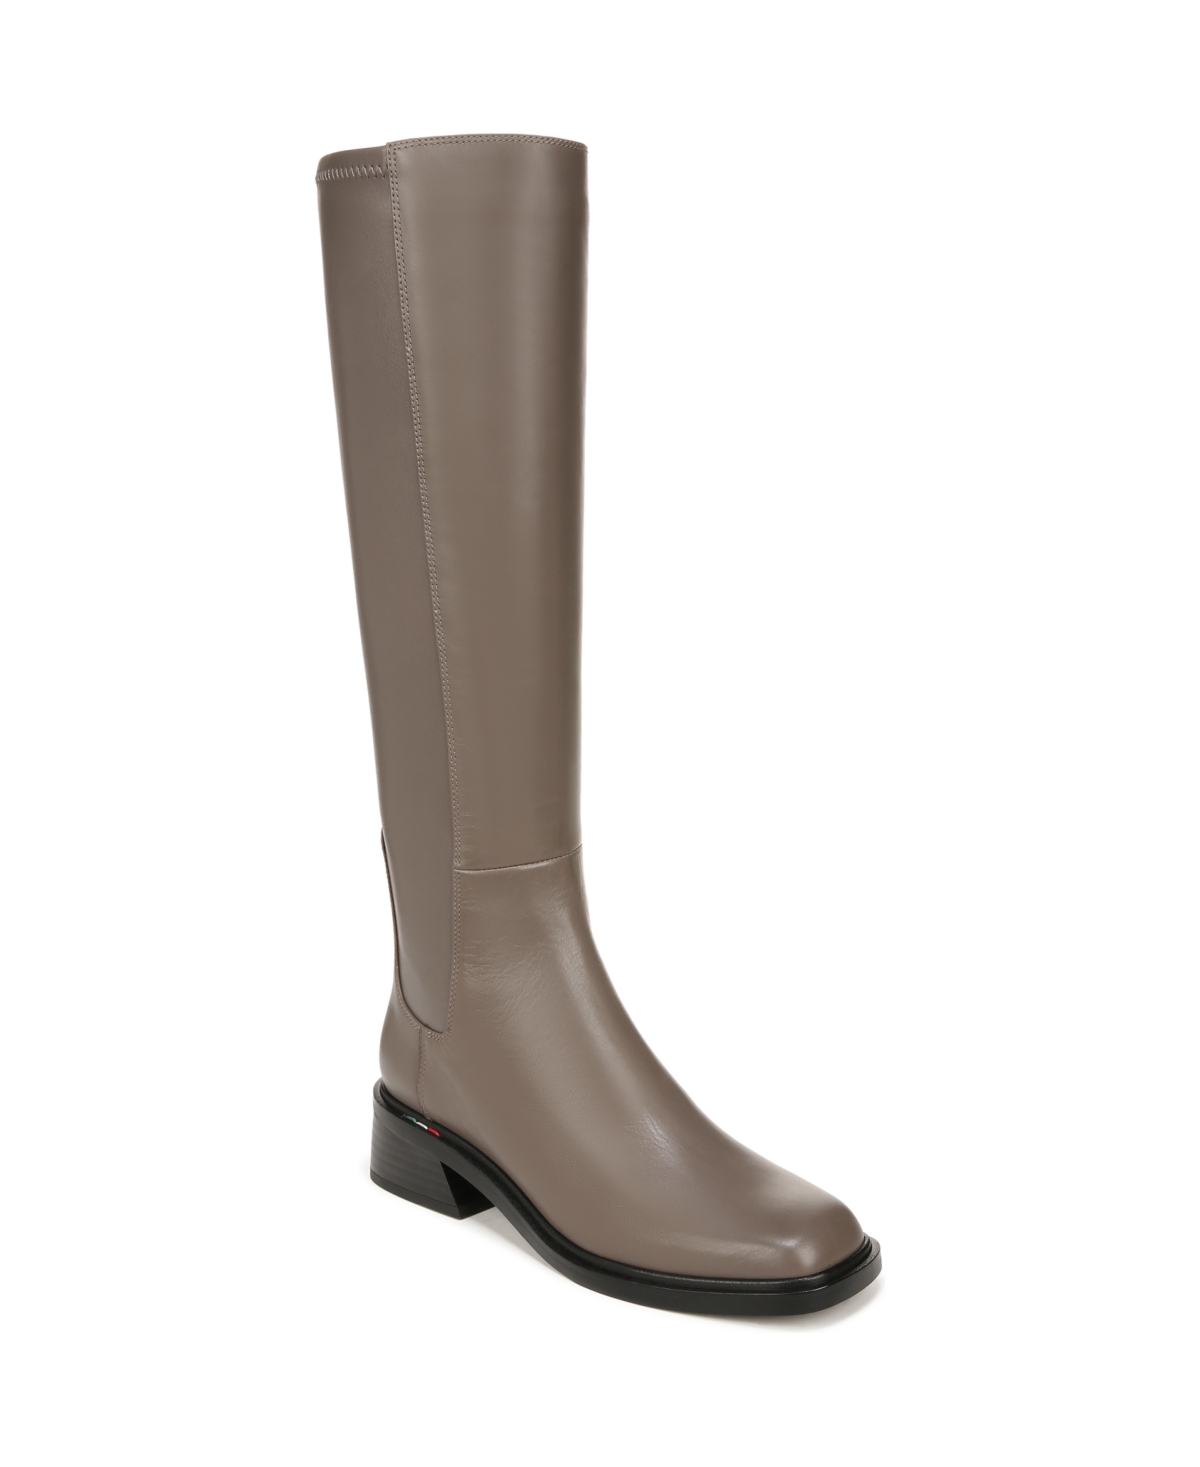 Women's Giselle Square Toe Knee High Boots - Shadow Grey Leather